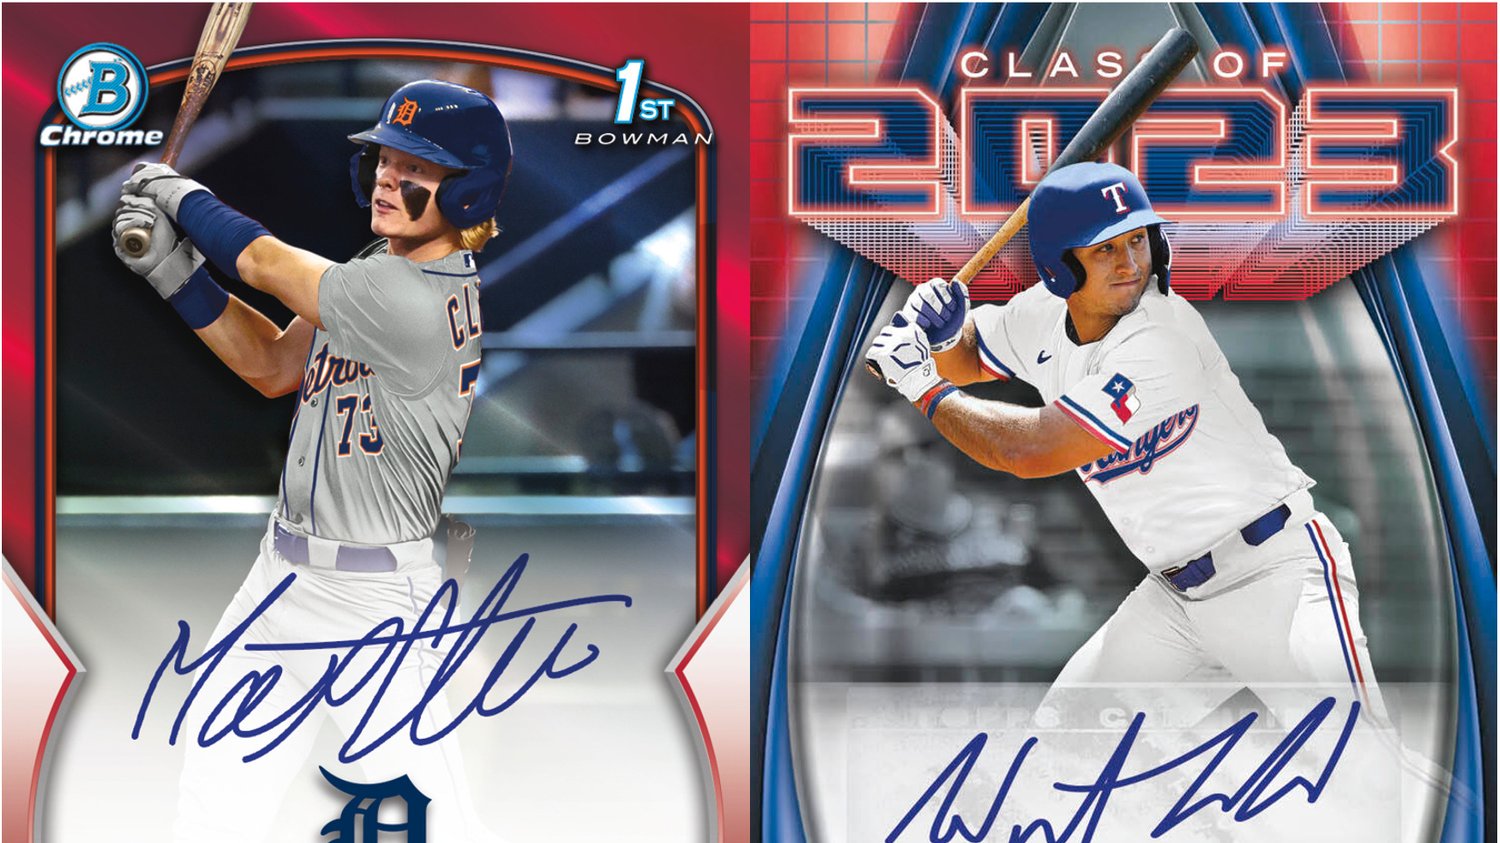 2023 Bowman Draft Preview — Prospects Live